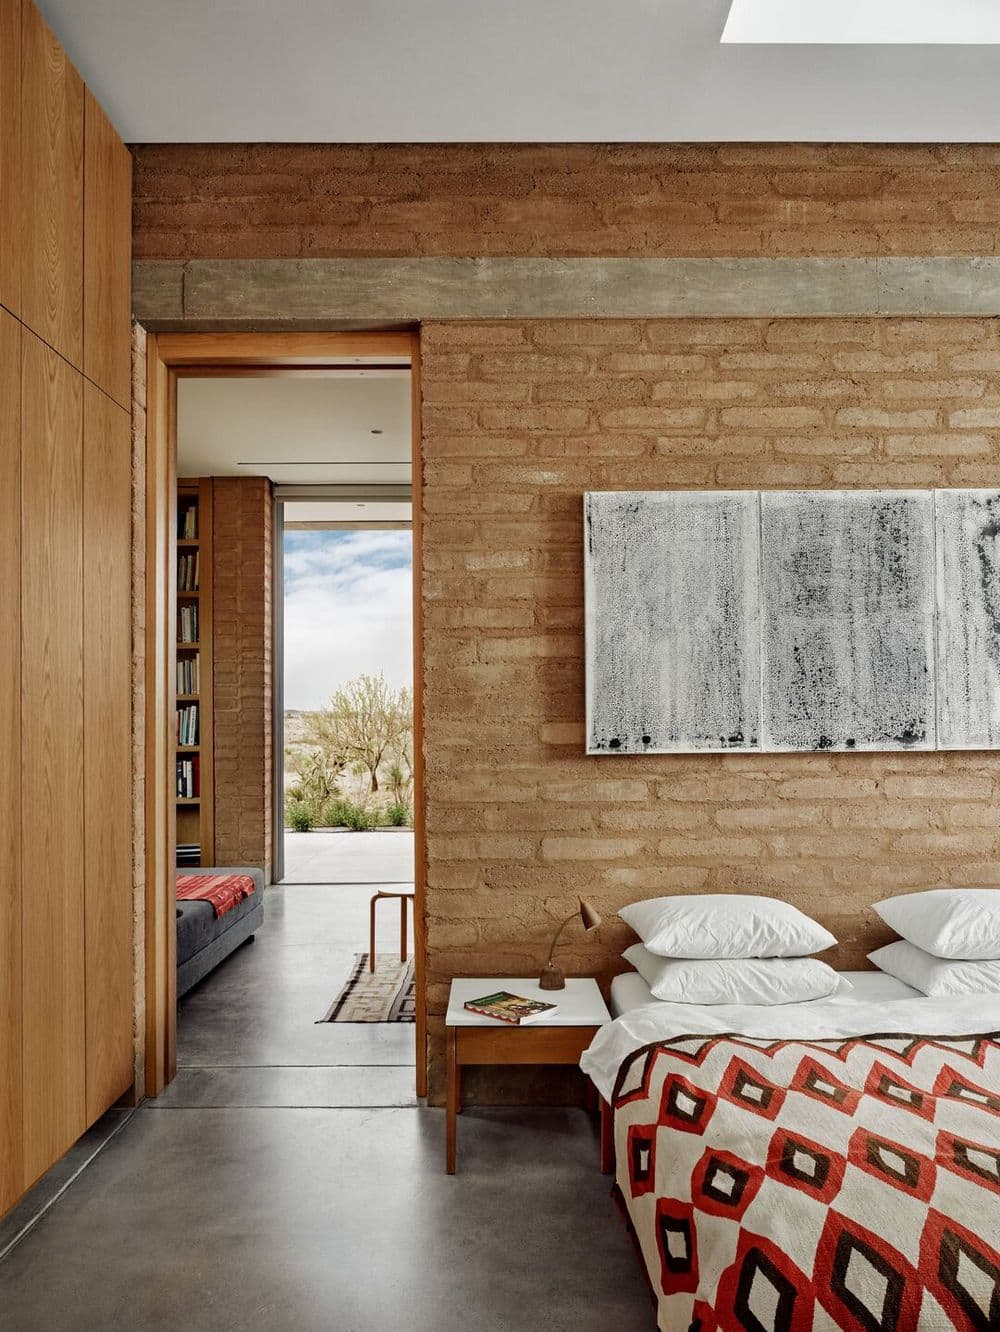 A New Detached Addition to an Existing Home in Marfa, Texas